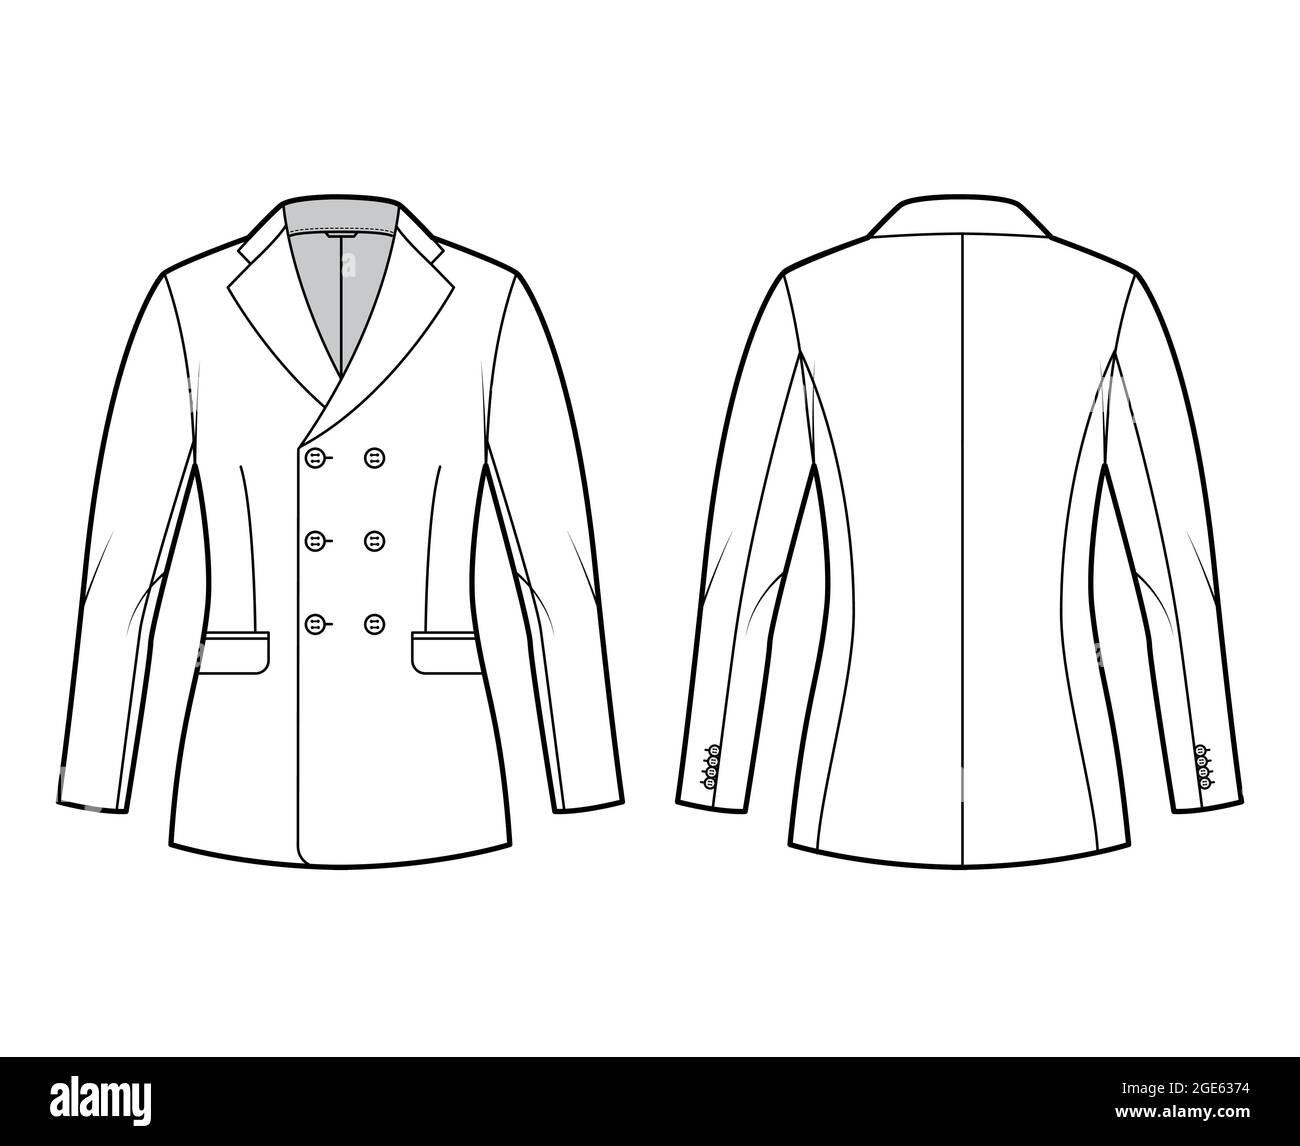 Fitted jacket suit technical fashion illustration with double breasted, notched lapel collar, flap pockets, hip length. Flat Blazer coat template front, back, white color. Women, men unisex CAD mockup Stock Vector